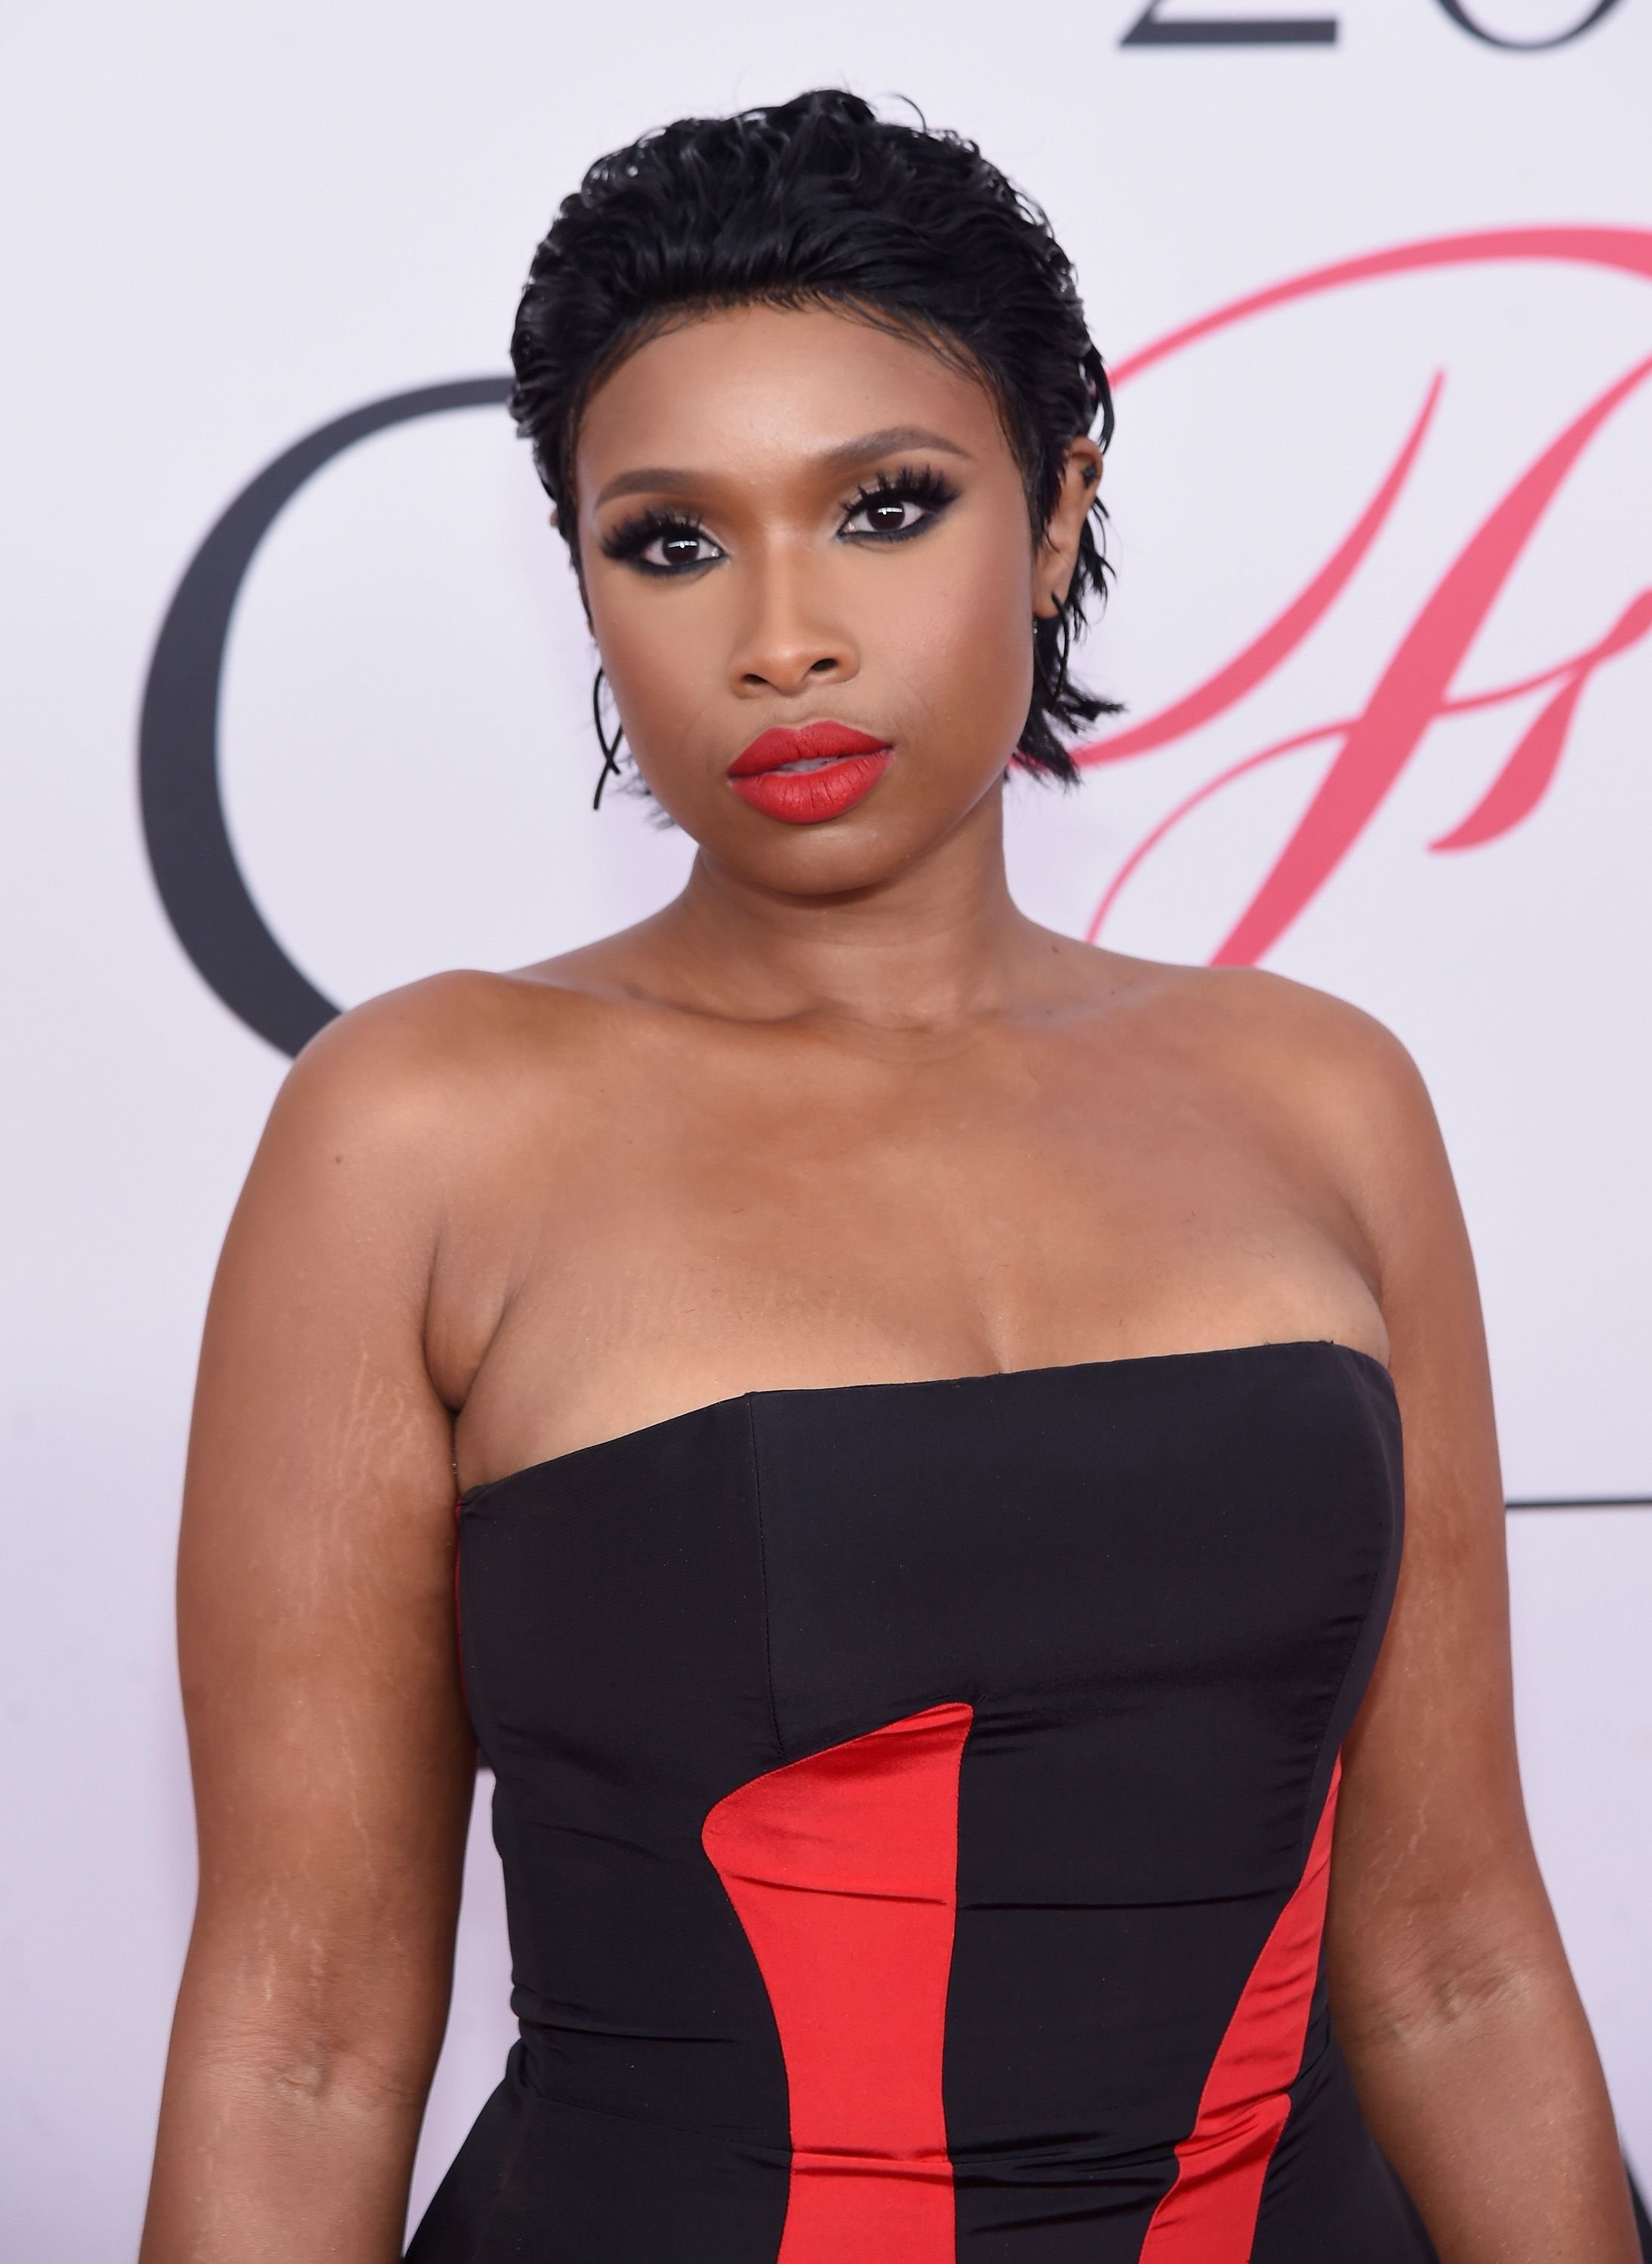 Jennifer Hudson at the CFDA Fashion Awards on June 6, 2016 in New York. | Photo: Getty Images